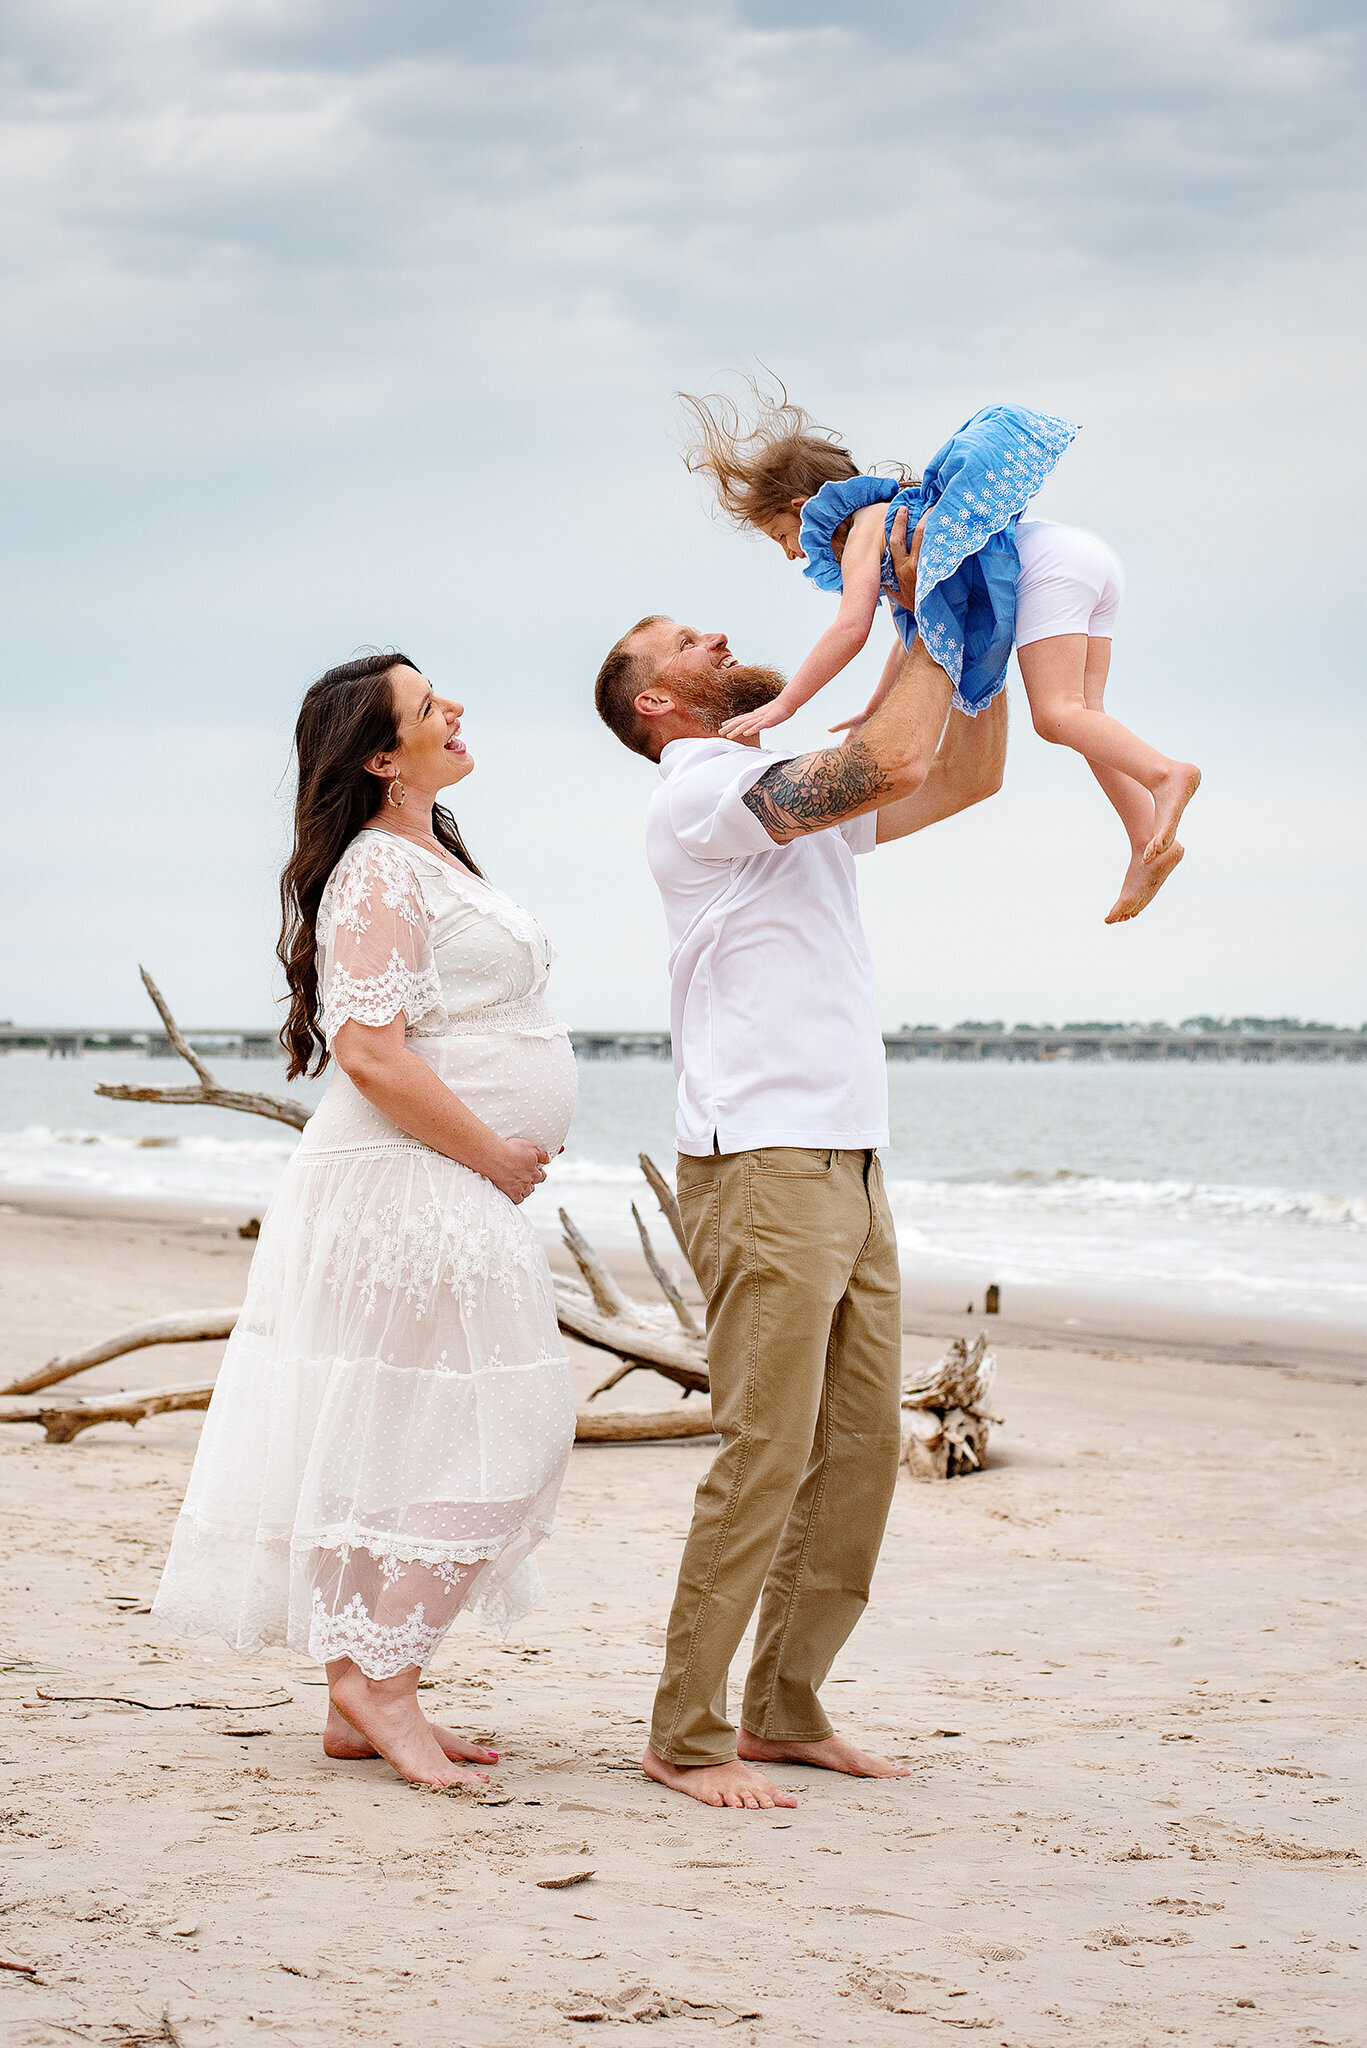 Dad lifts daughter in blue dress while pregnant mom in white watches at Talbot Island in FL.